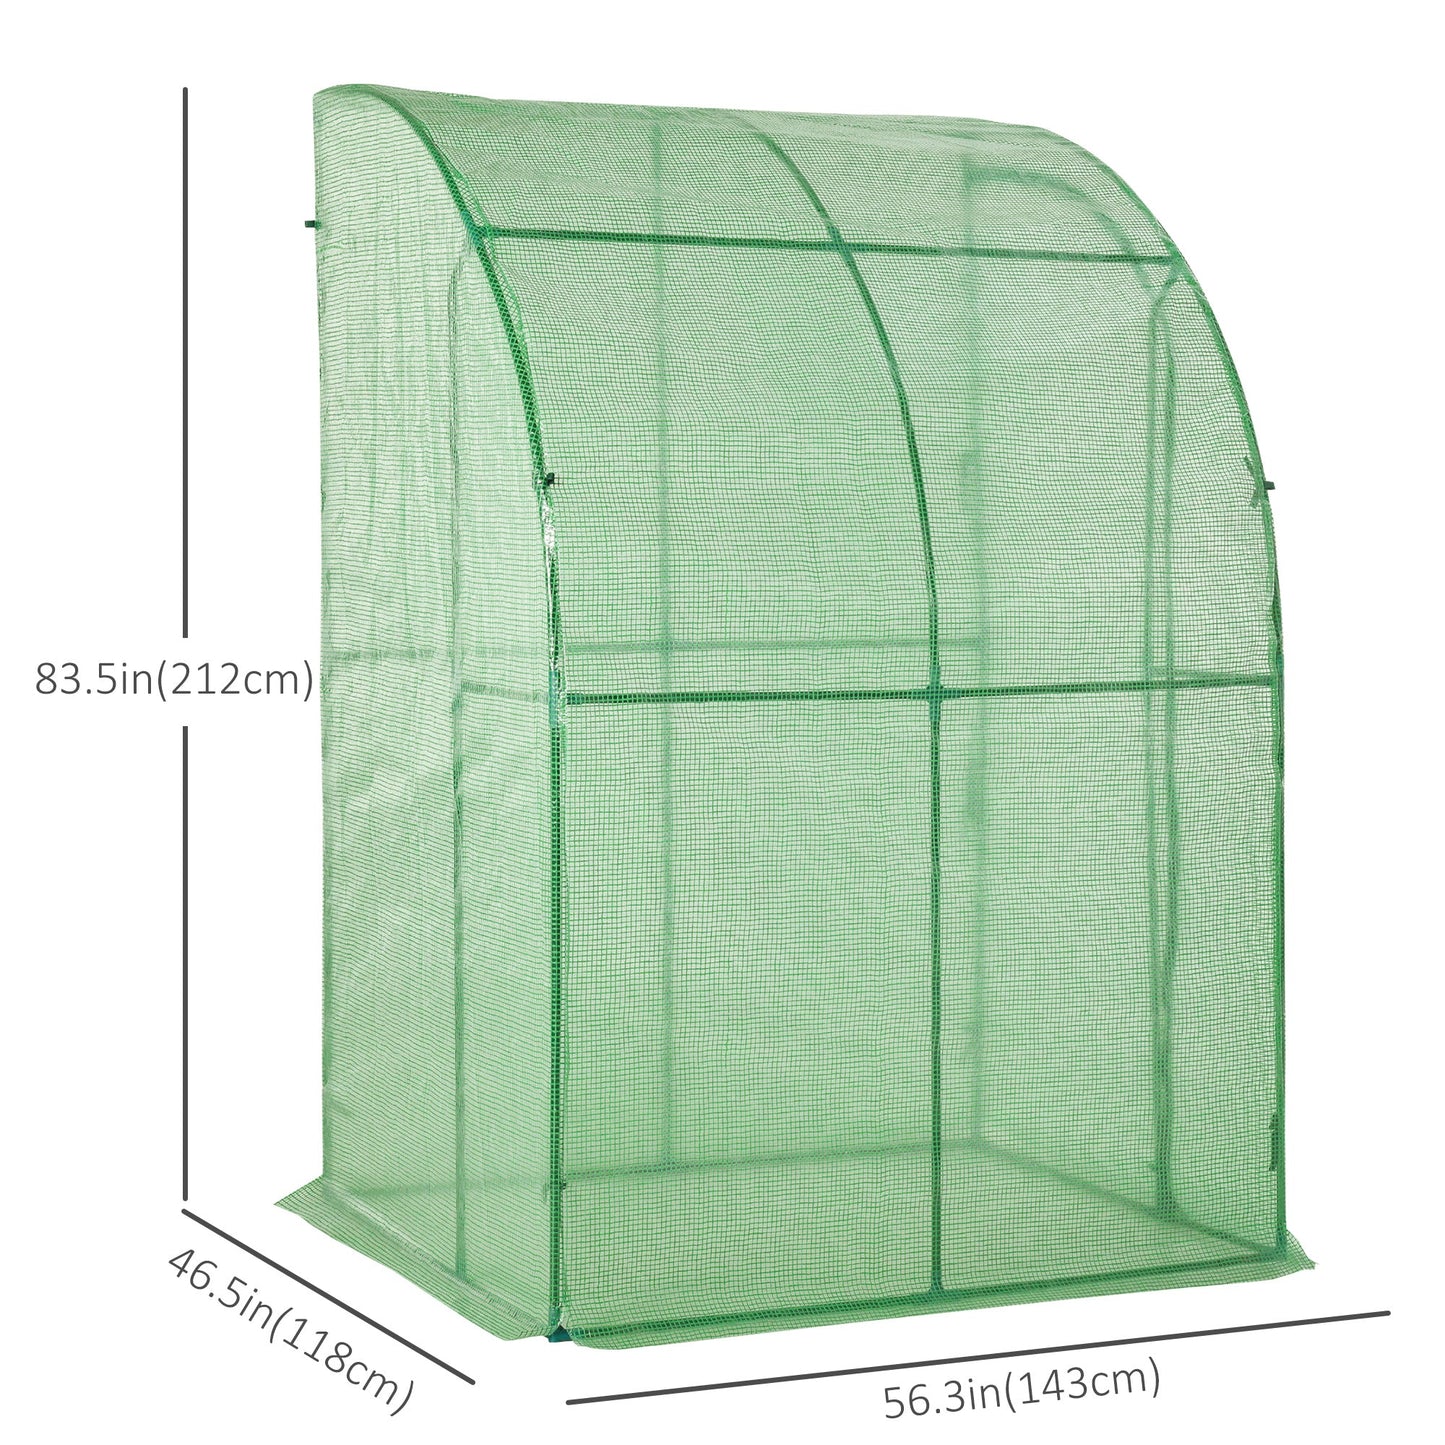 5' x 4' x 7' Outdoor Walk-in Garden Greenhouse, Polycarbonate Panels Plants Flower Growth Shed with Roll-Up Door Hot House, for Plants Herbs Vegetables - Green at Gallery Canada